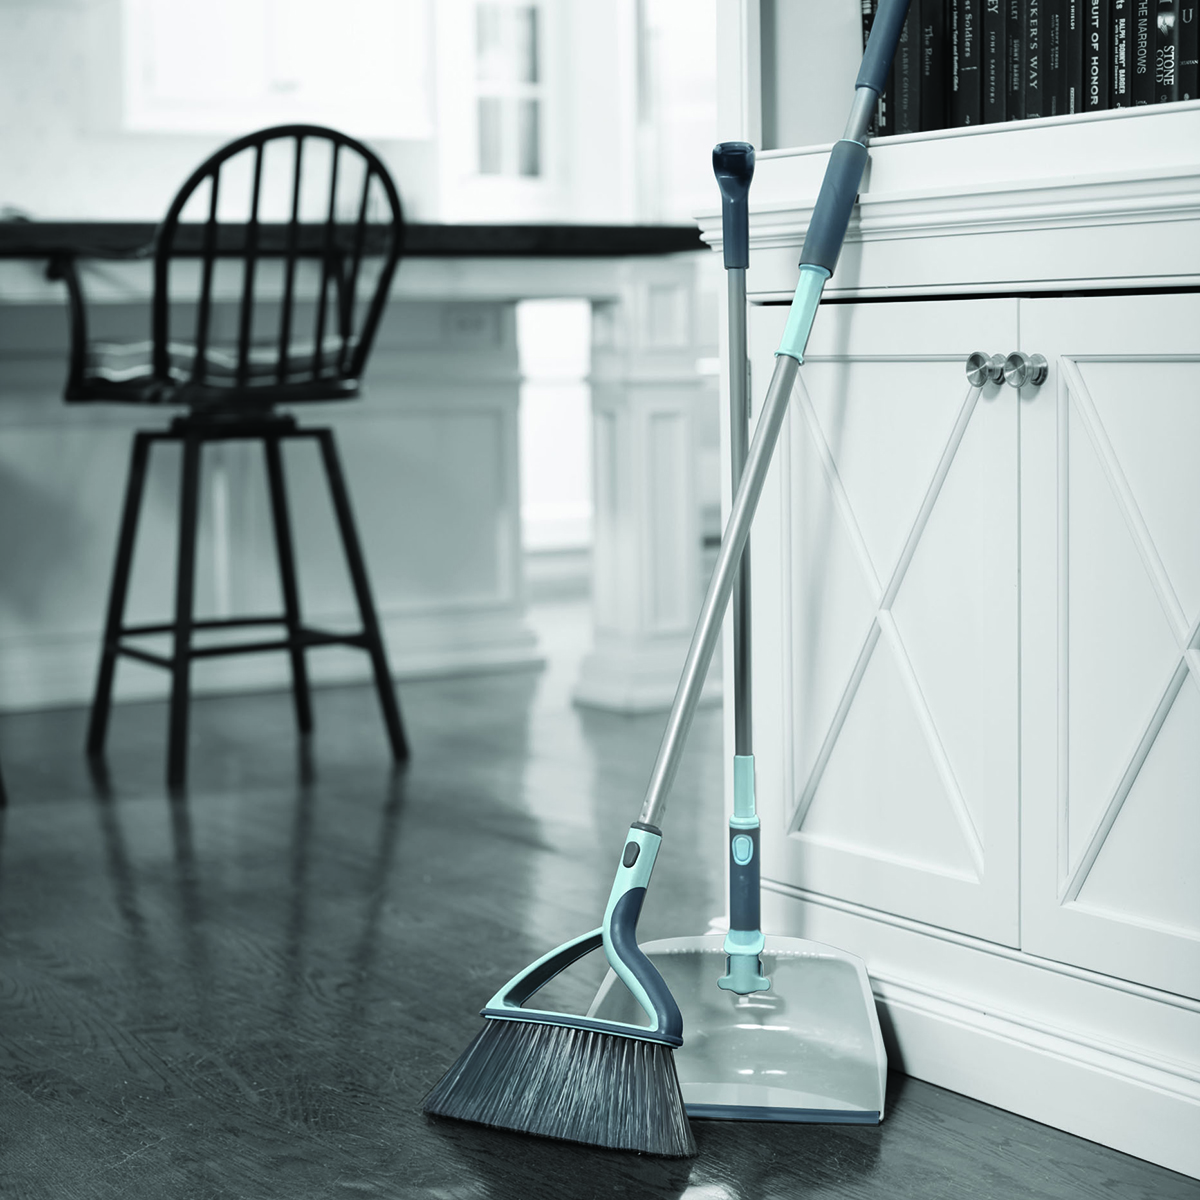 Casabella Upright Broom and Dustpan Set for Cleaning and Sweeping